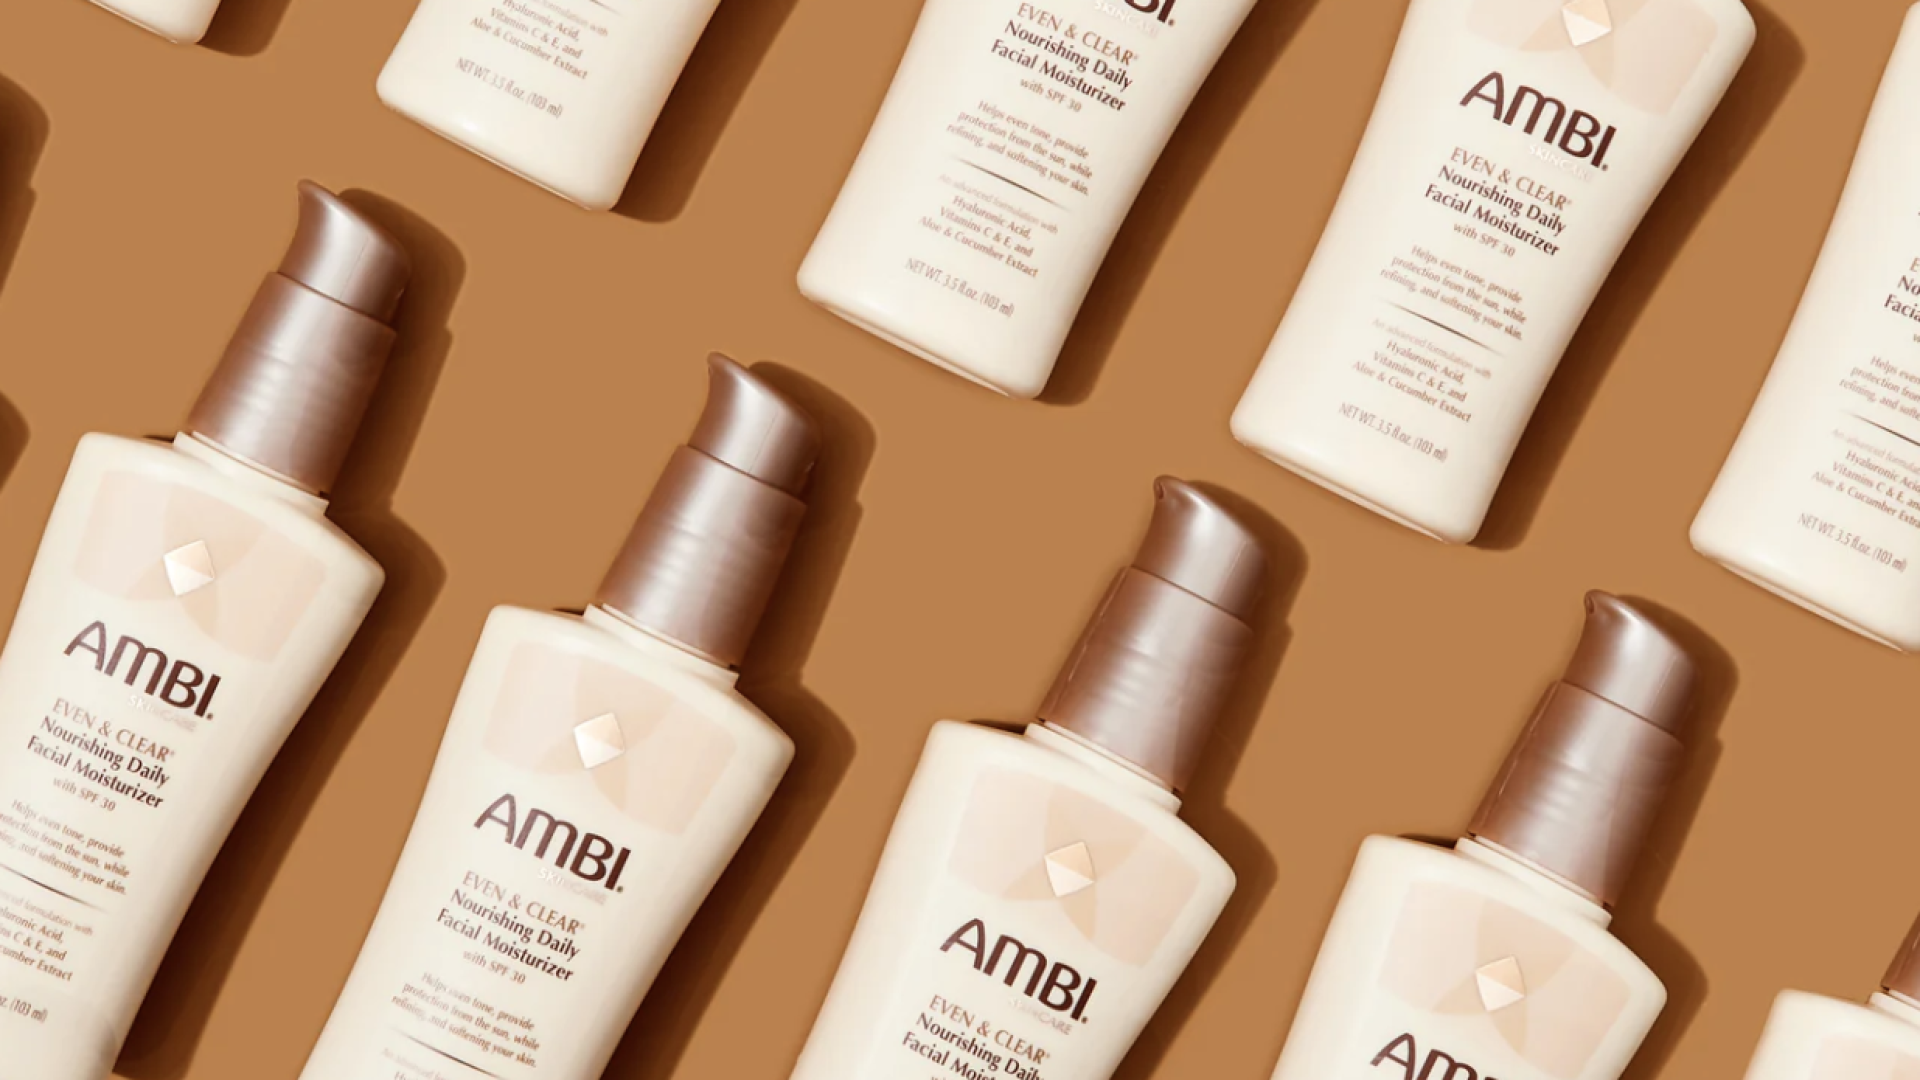 Ambi Launches 'Skin Wisdom' Series To Help Women Of Color Figure Out Best Practices For Healthy, Melanated Skin